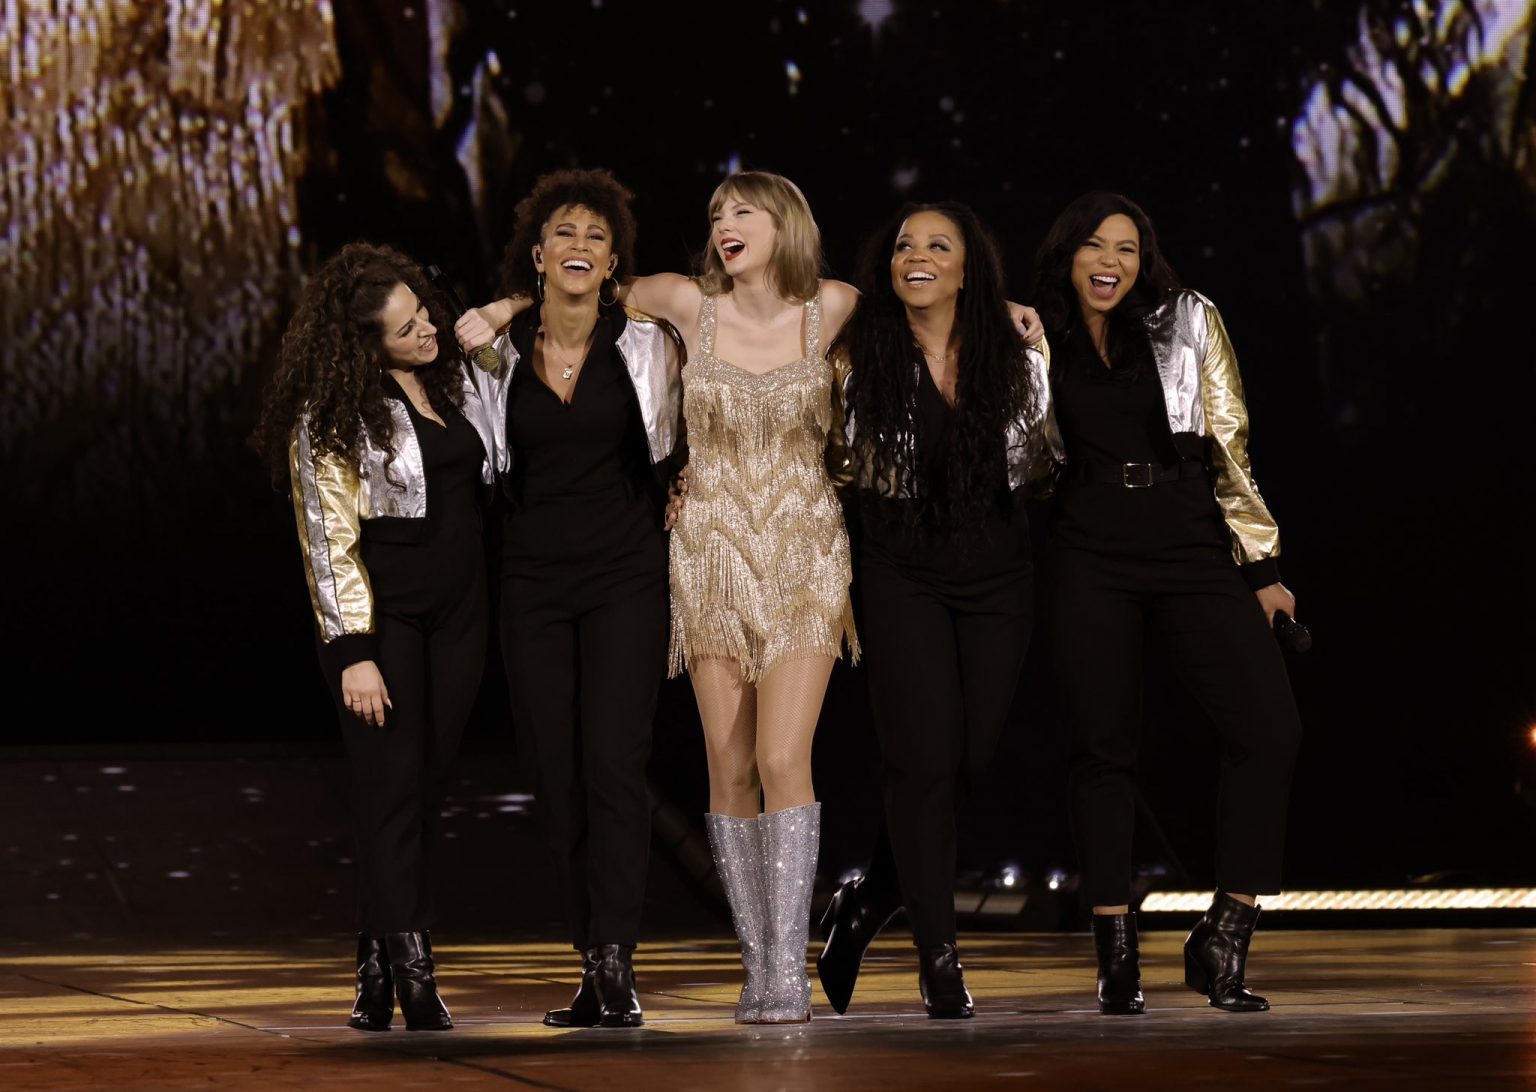 Taylor Swift 'Eras' Tour Here's the Massive 44song Setlist